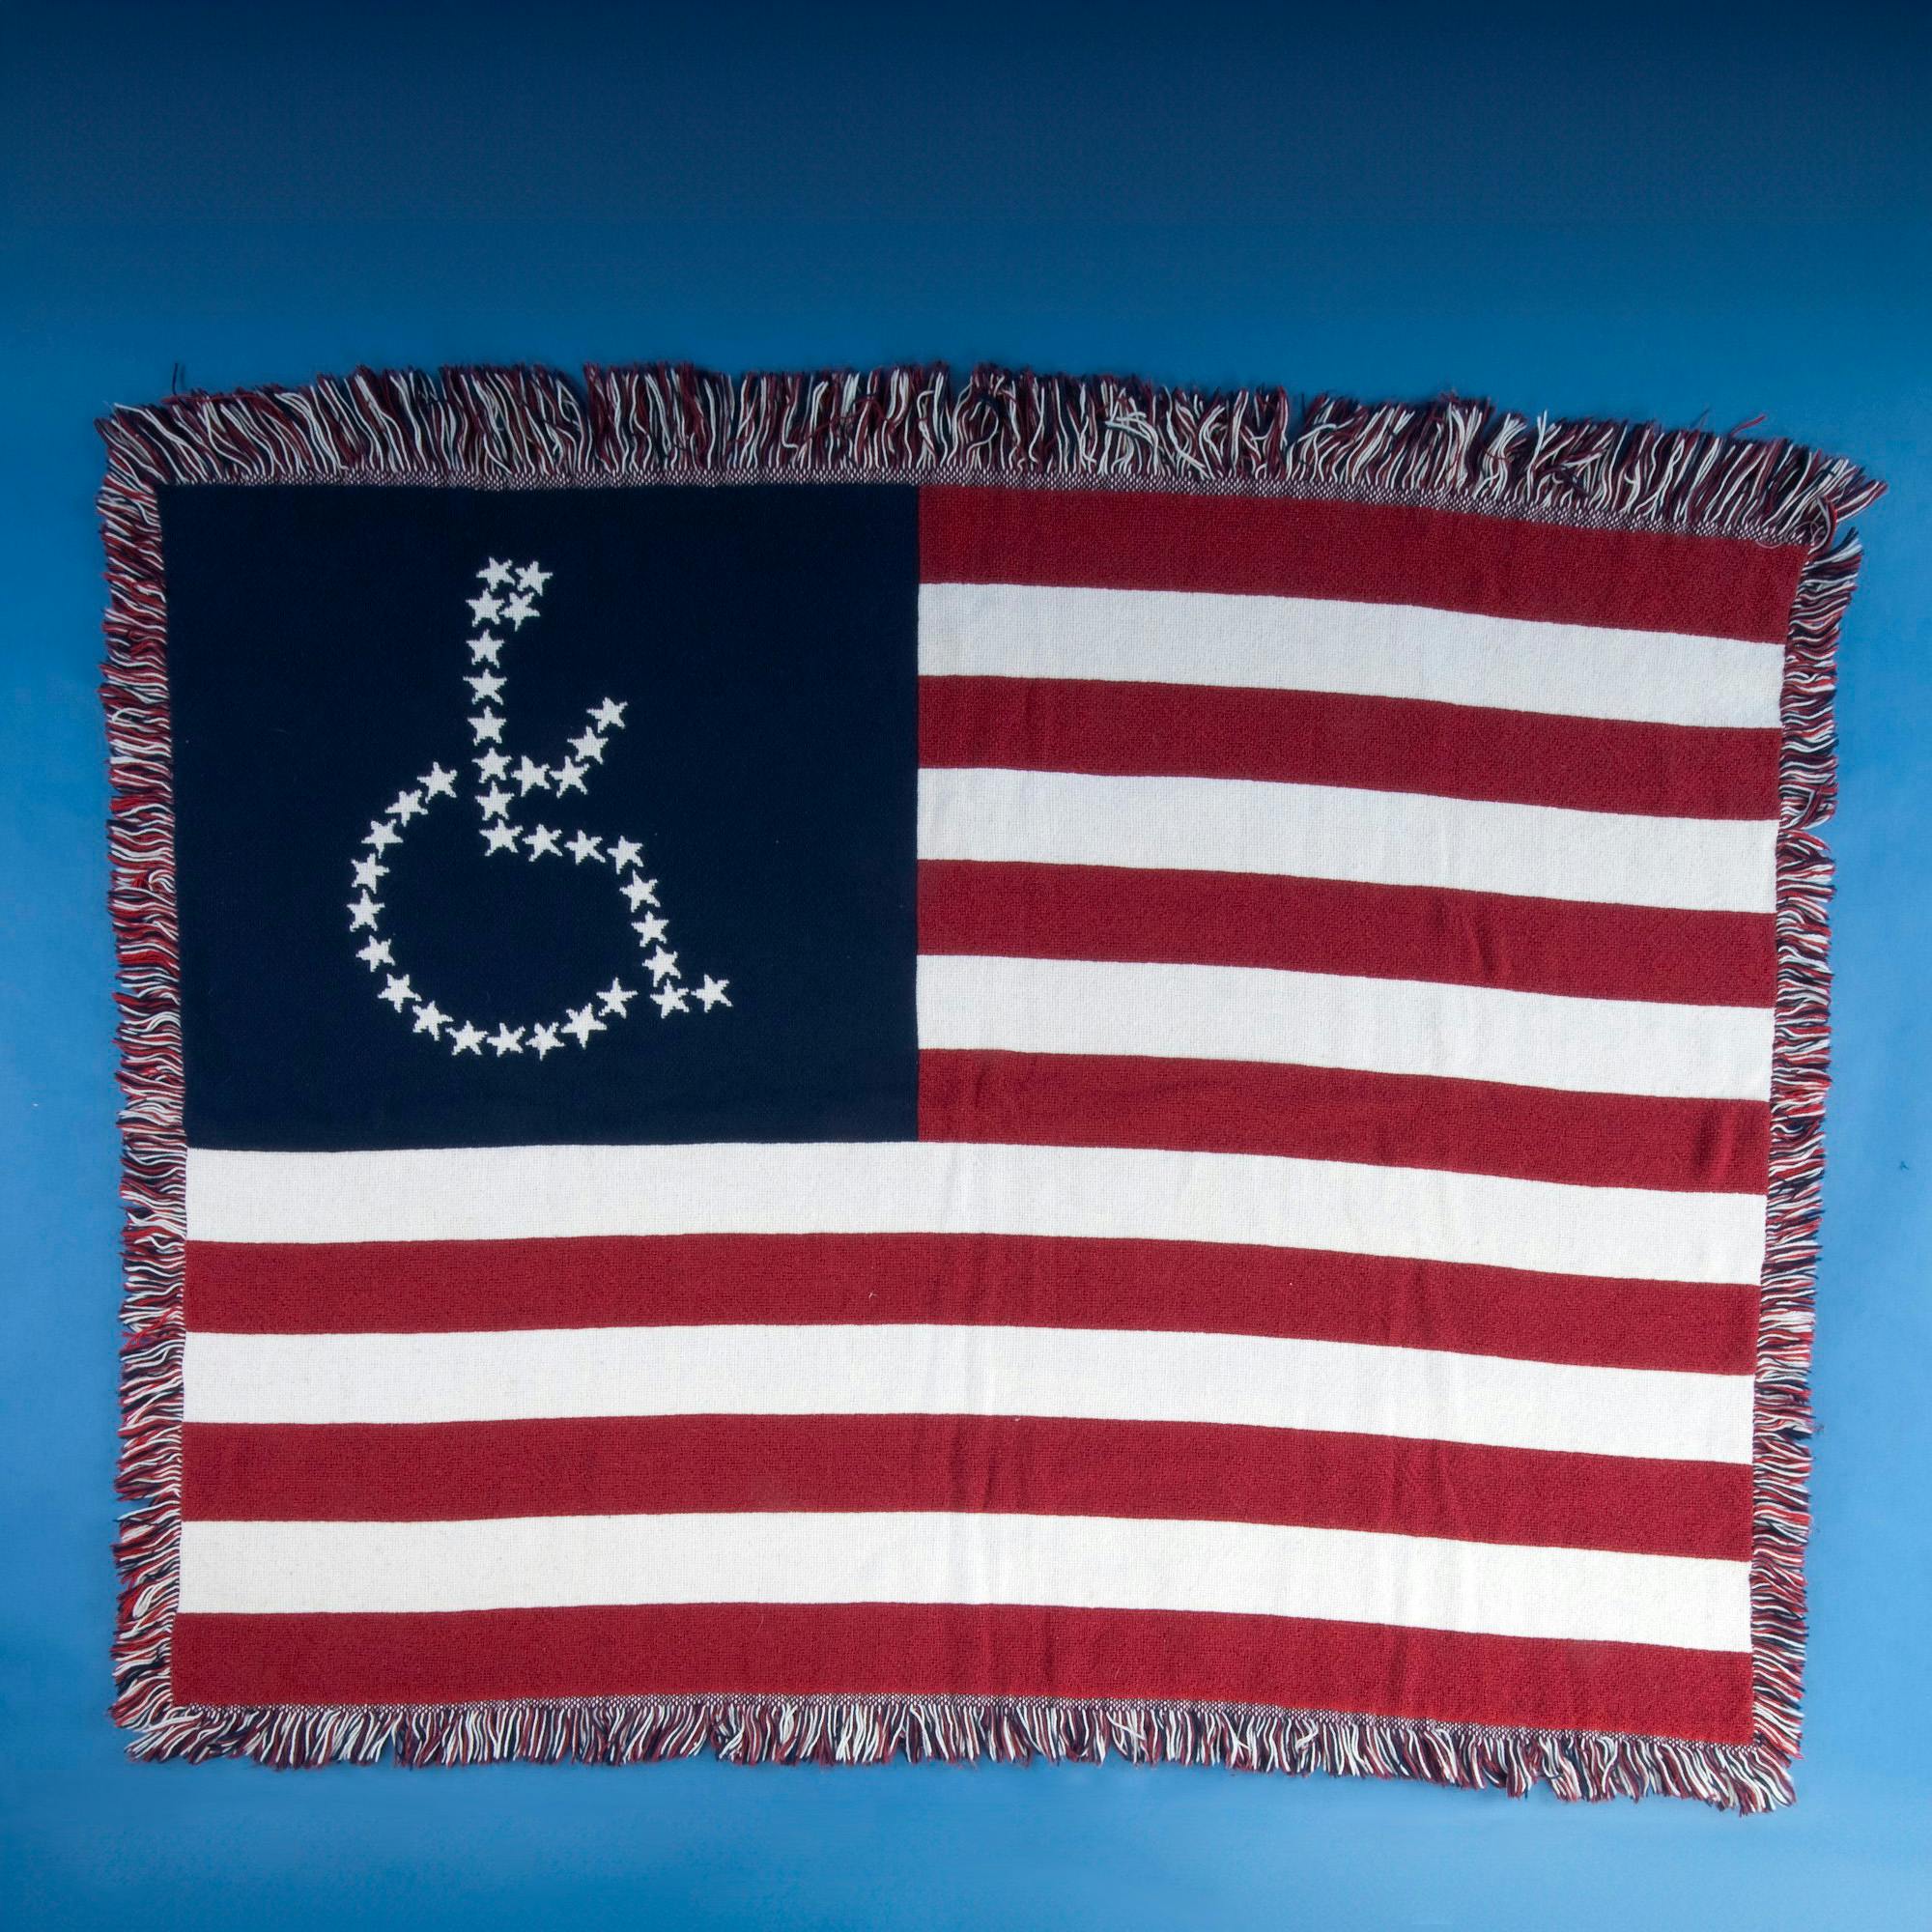 American flag blanket with stars in the shape of a wheelchair symbol